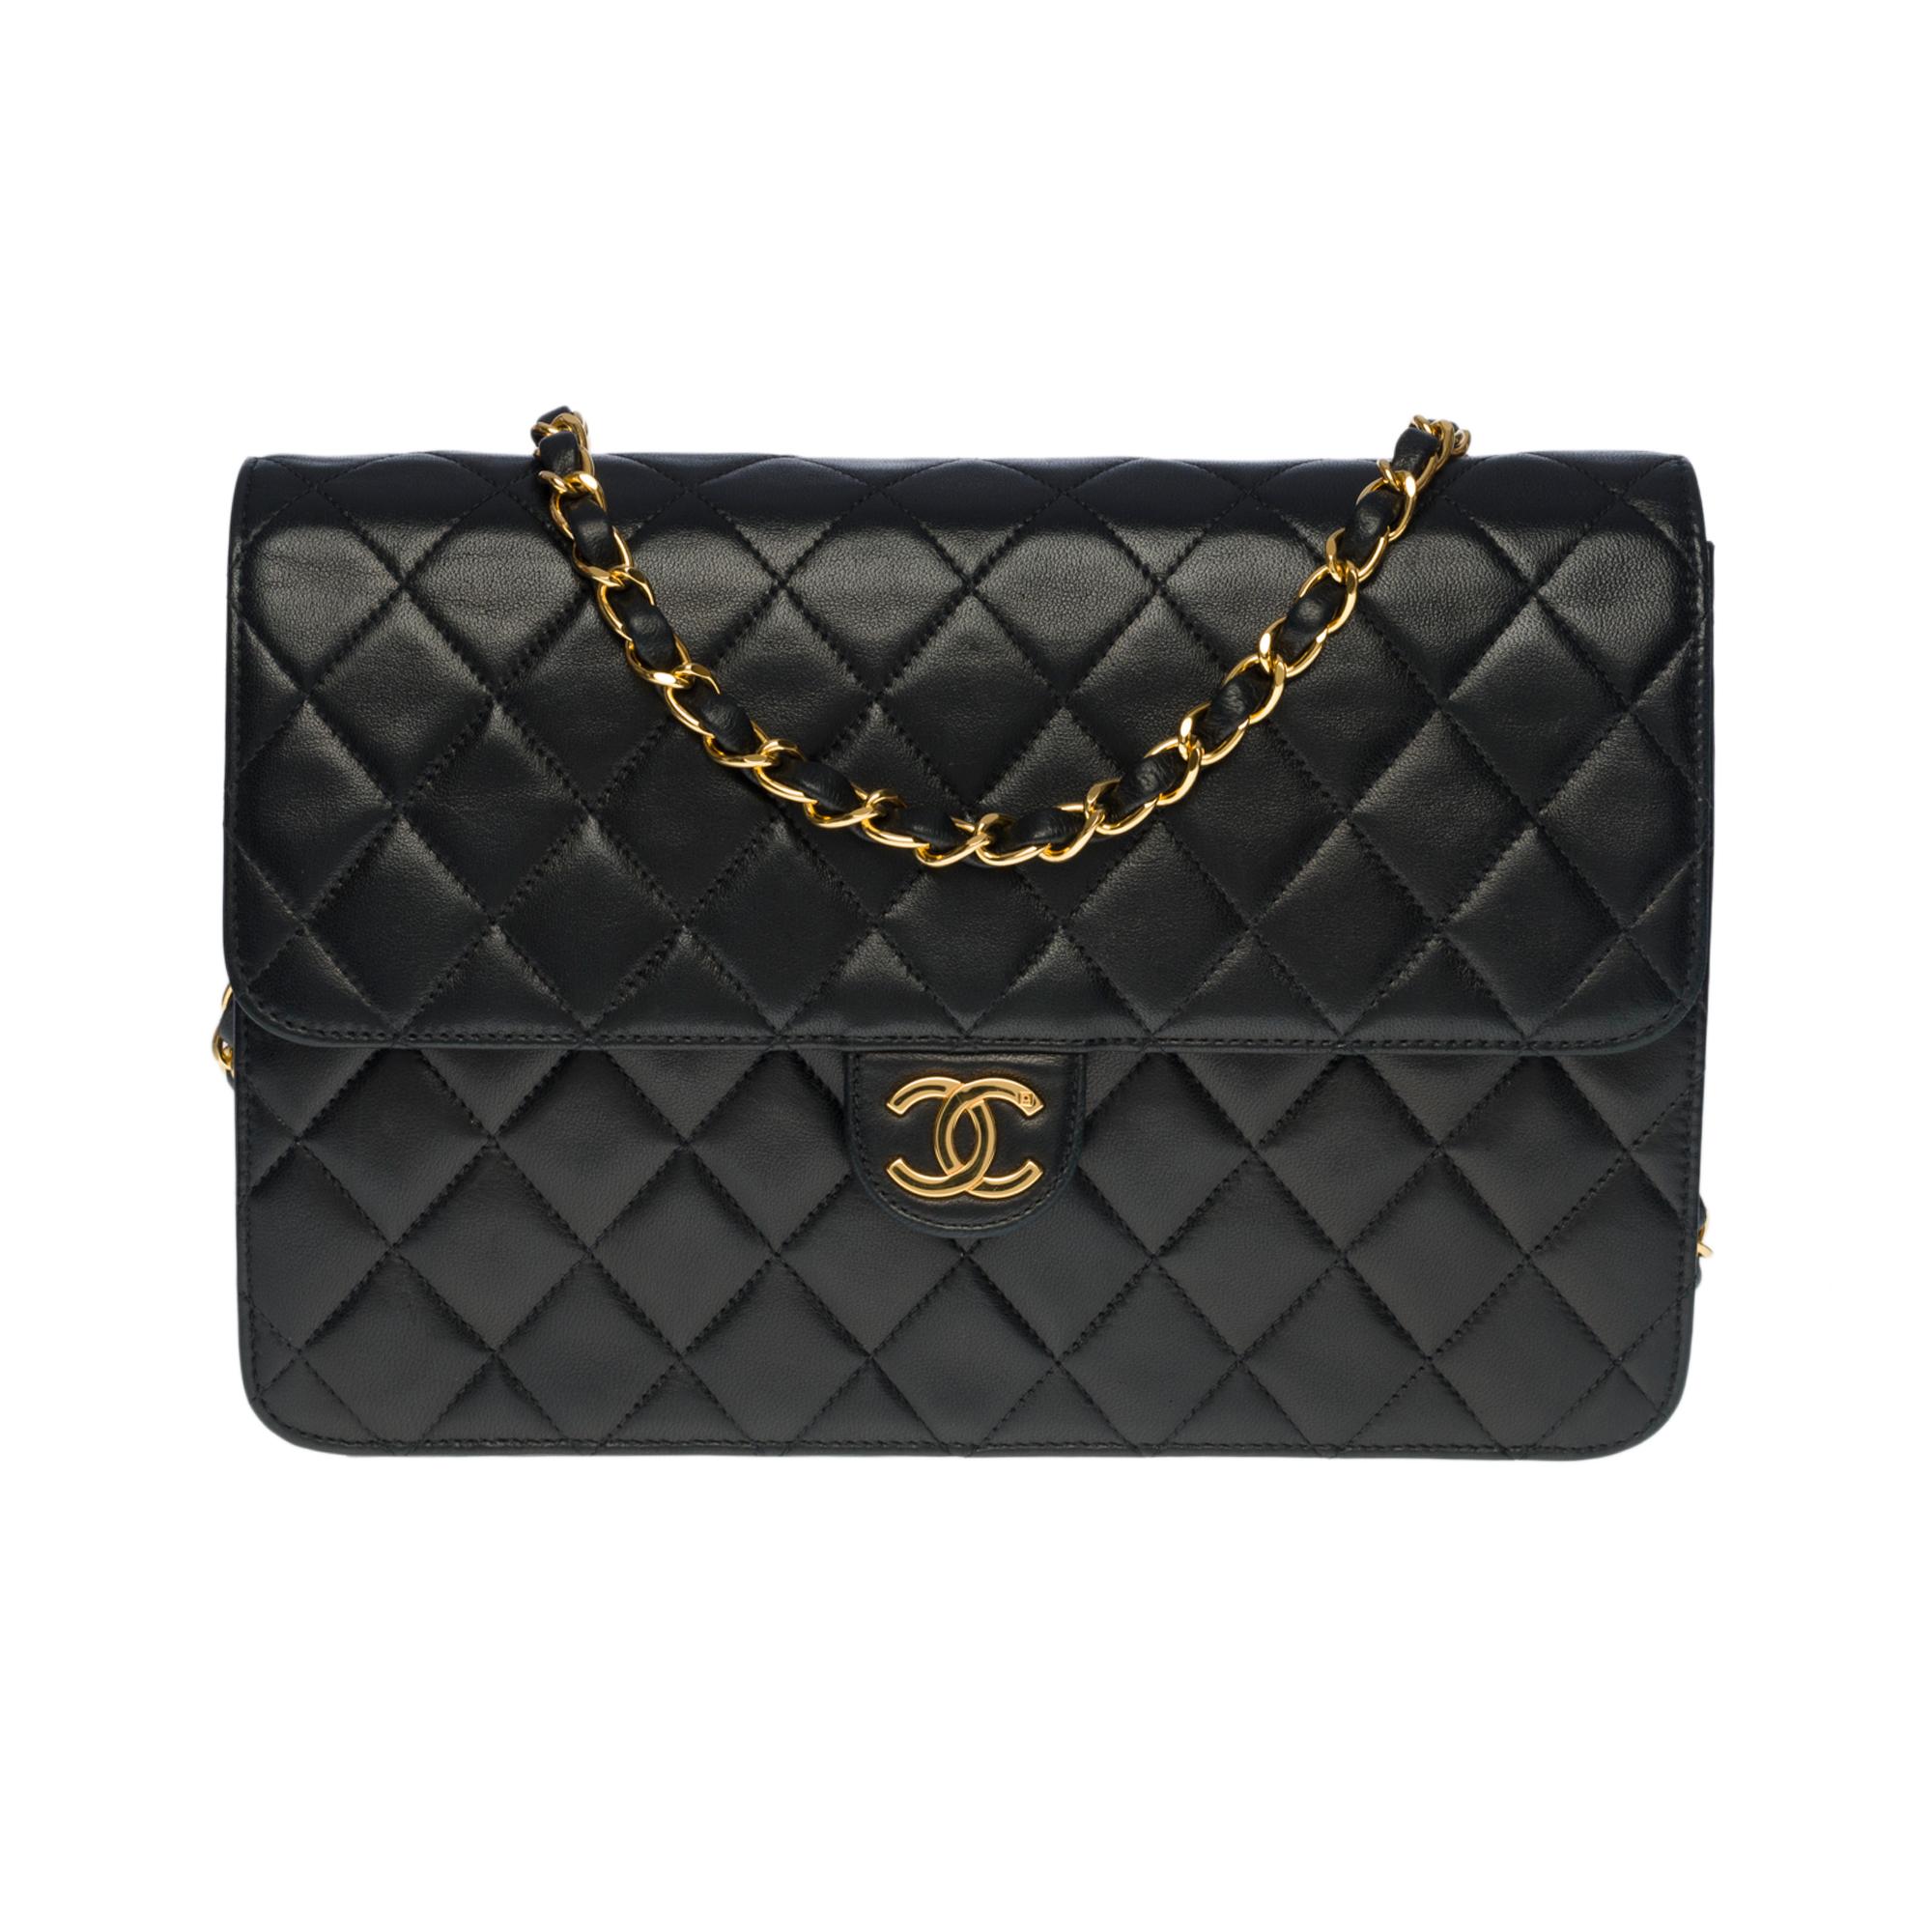 Beautiful Chanel Classic Flap Bag Medium in black quilted lambskin leather, gold-plated hardware, a gold-plated chain handle interlaced with black leather for shoulder and shoulder strap

Flap closure, gold CC studded clasp
Bordeaux leather lining,